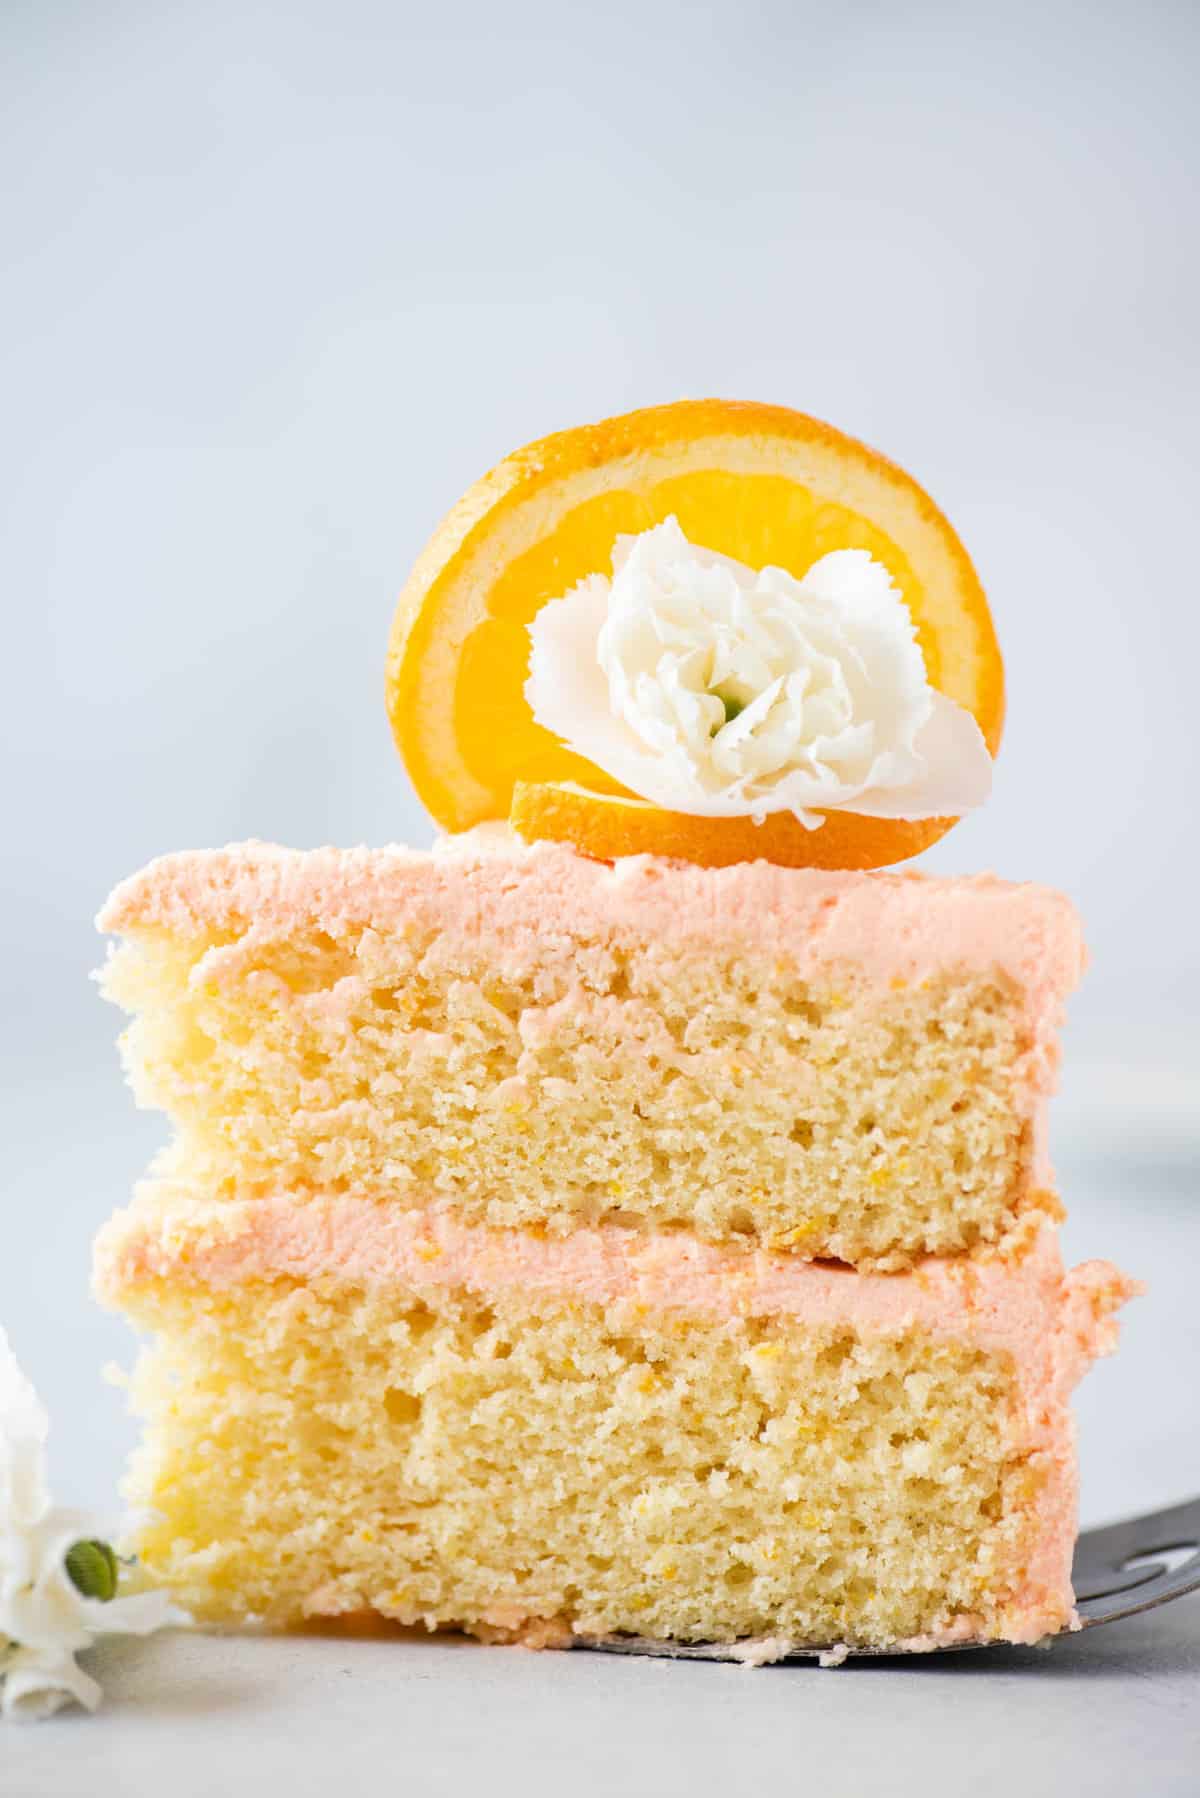 slice of orange cake decorated with an orange slice and white flower on a metal spatula